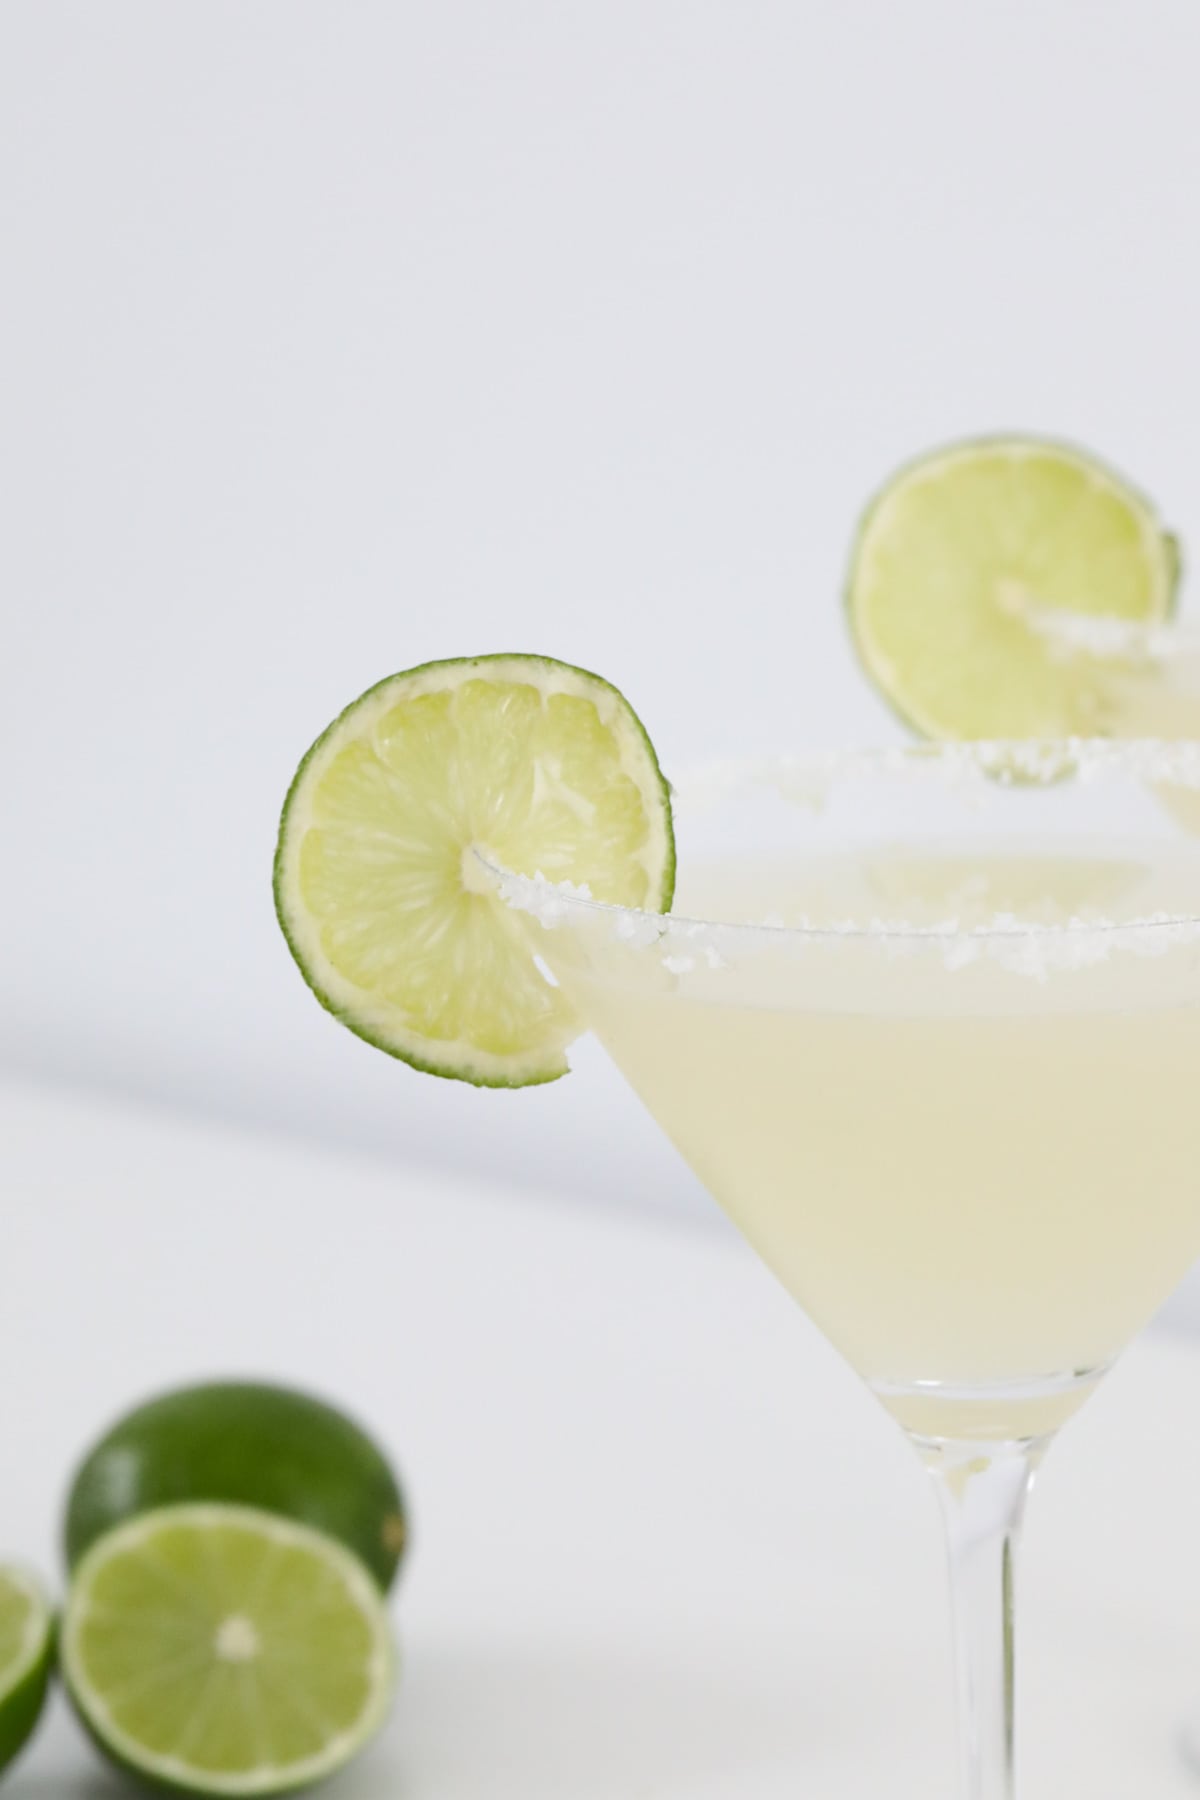 Lime and salt garnishing a cocktail glass with margarita.